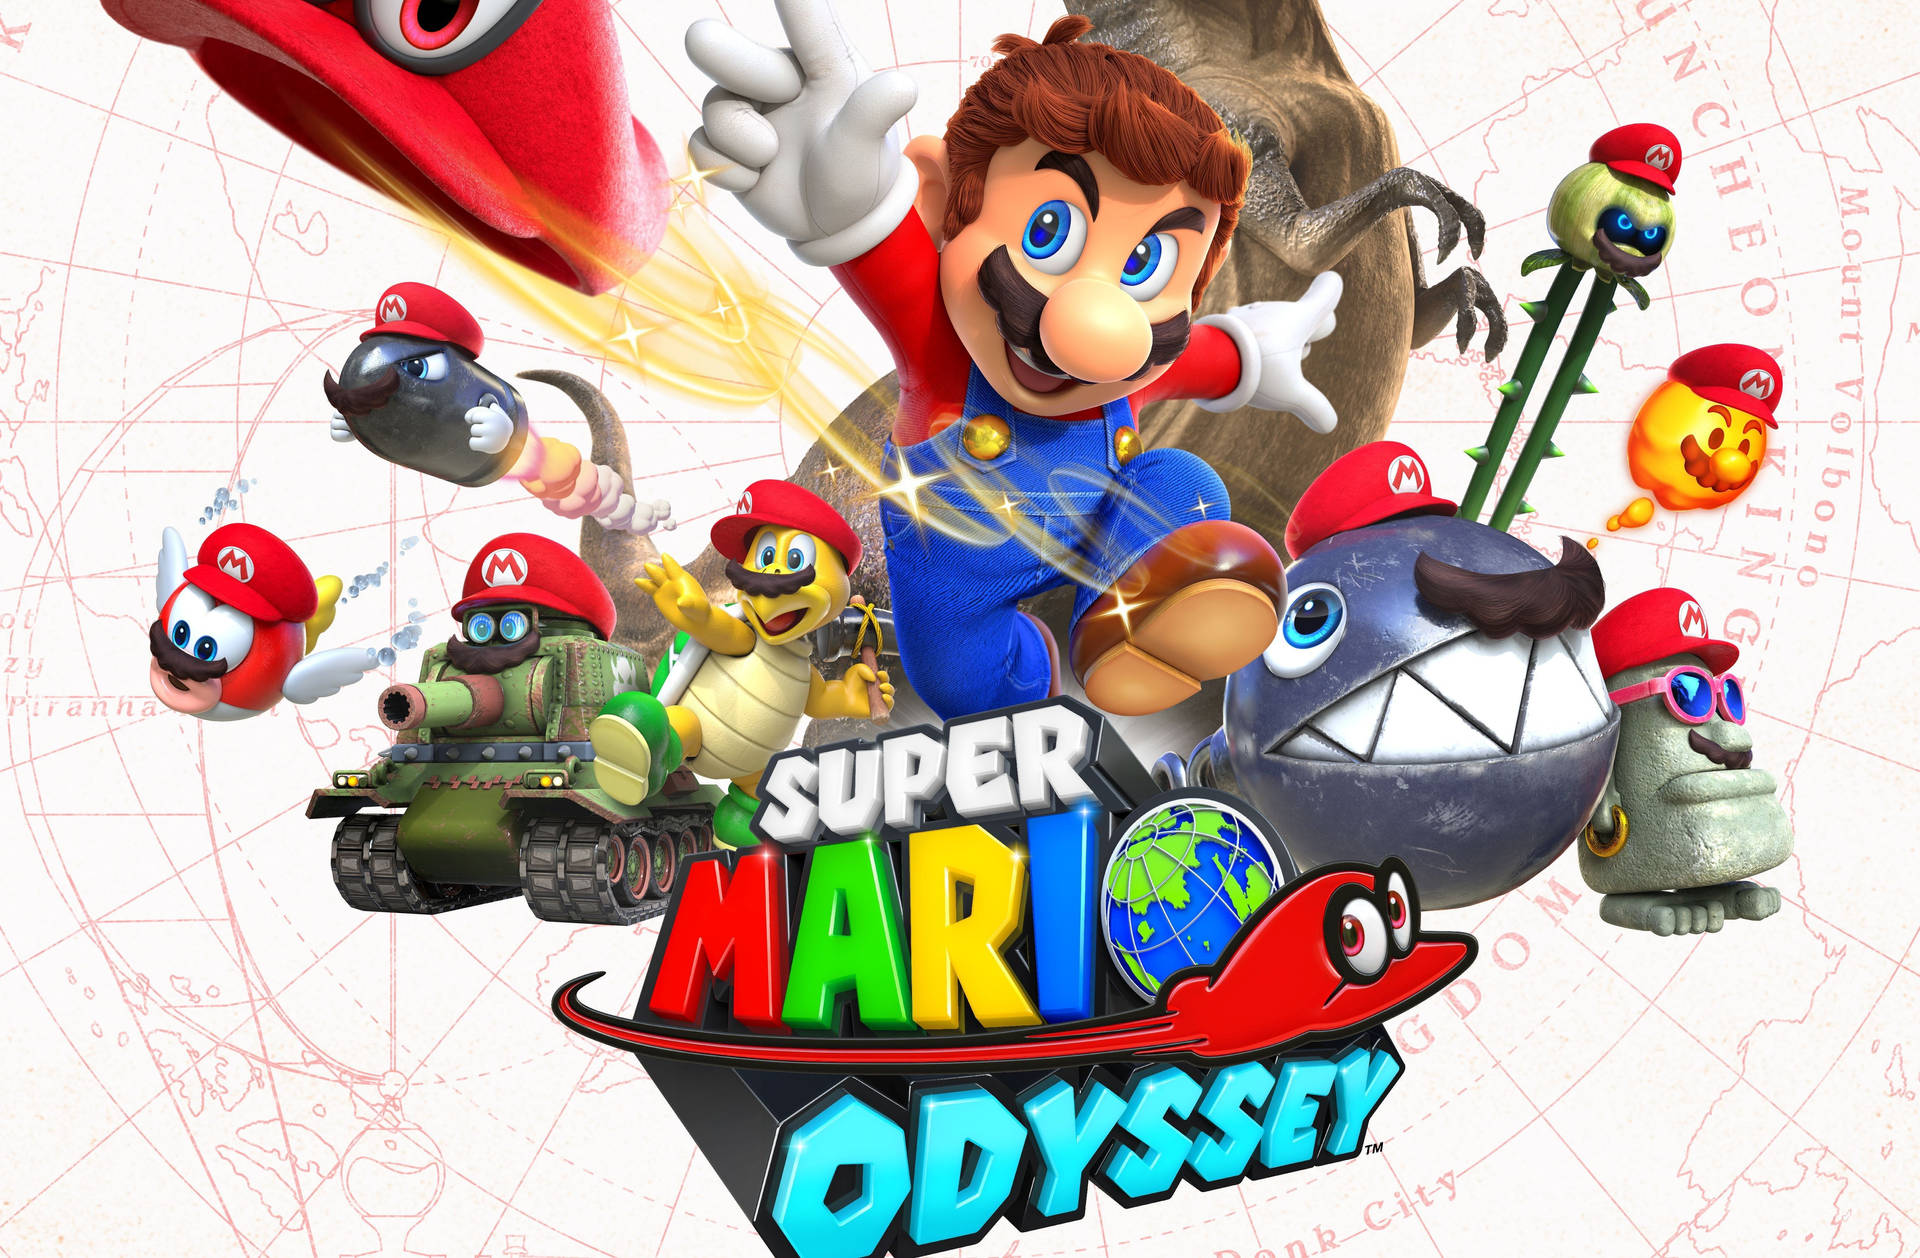 Supper Mario Odyssey Game Poster